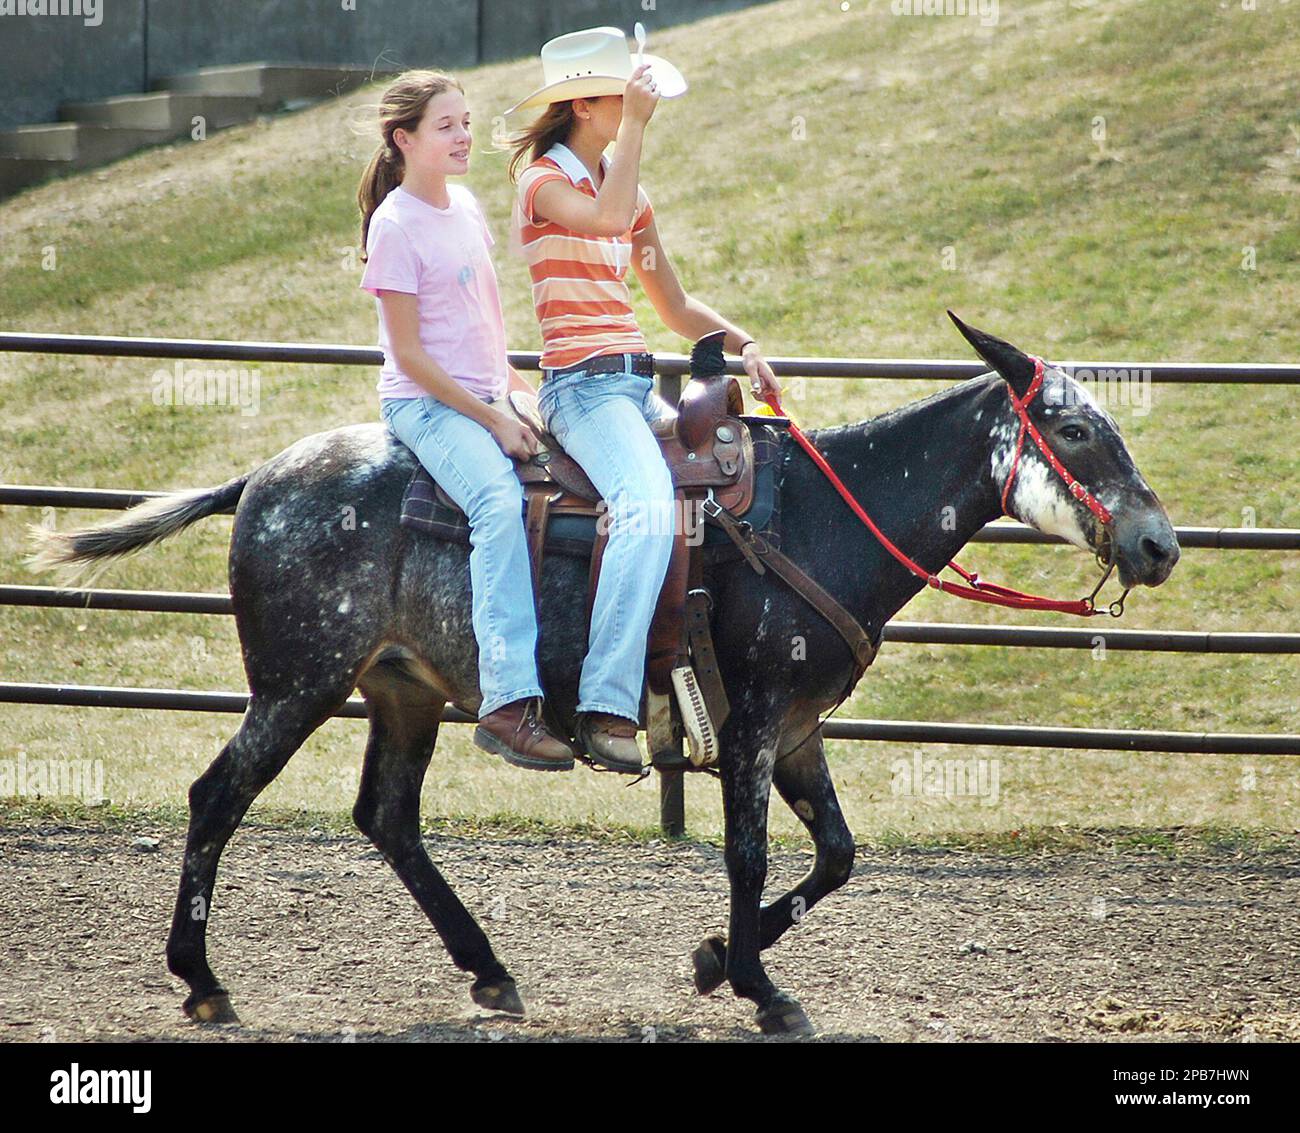 Abbie Coldiron, 14, of Dawn, Mo., right, gives her friend Shelbi Hoover,  14, of Tina, Mo., a ride on her mule Grasshopper while waiting to compete  in a mule riding event at